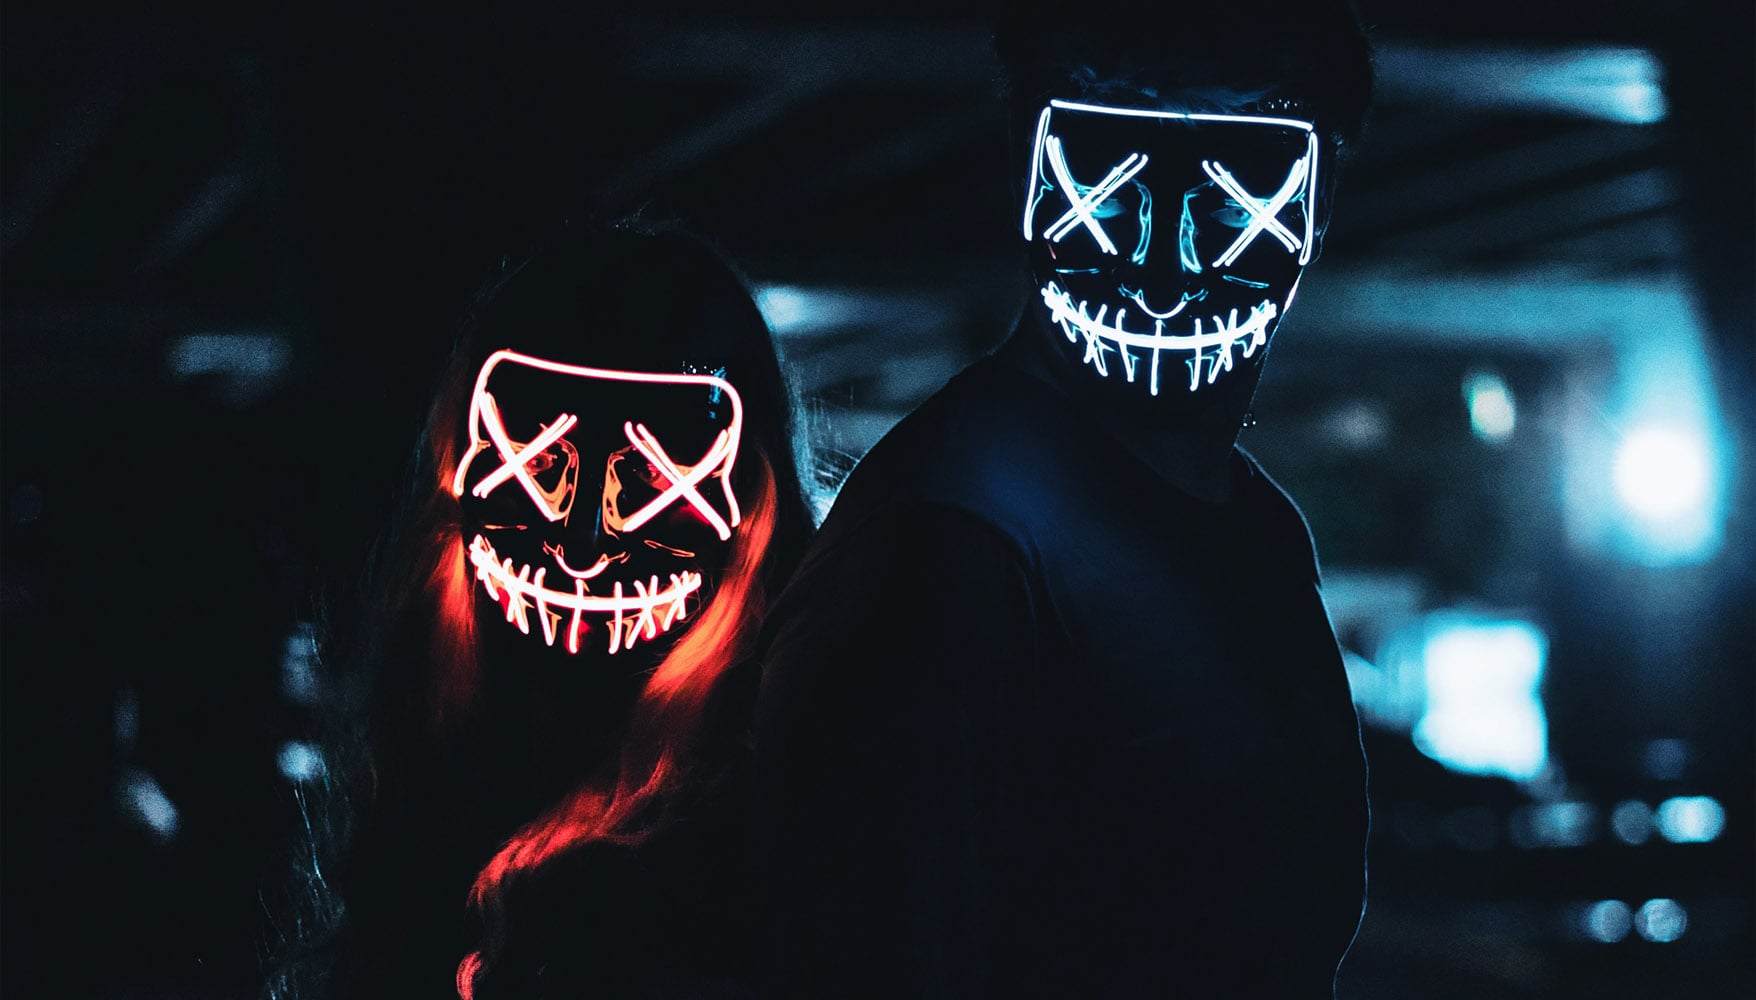 A photo of two people wearing LED masks depicting toxicity.